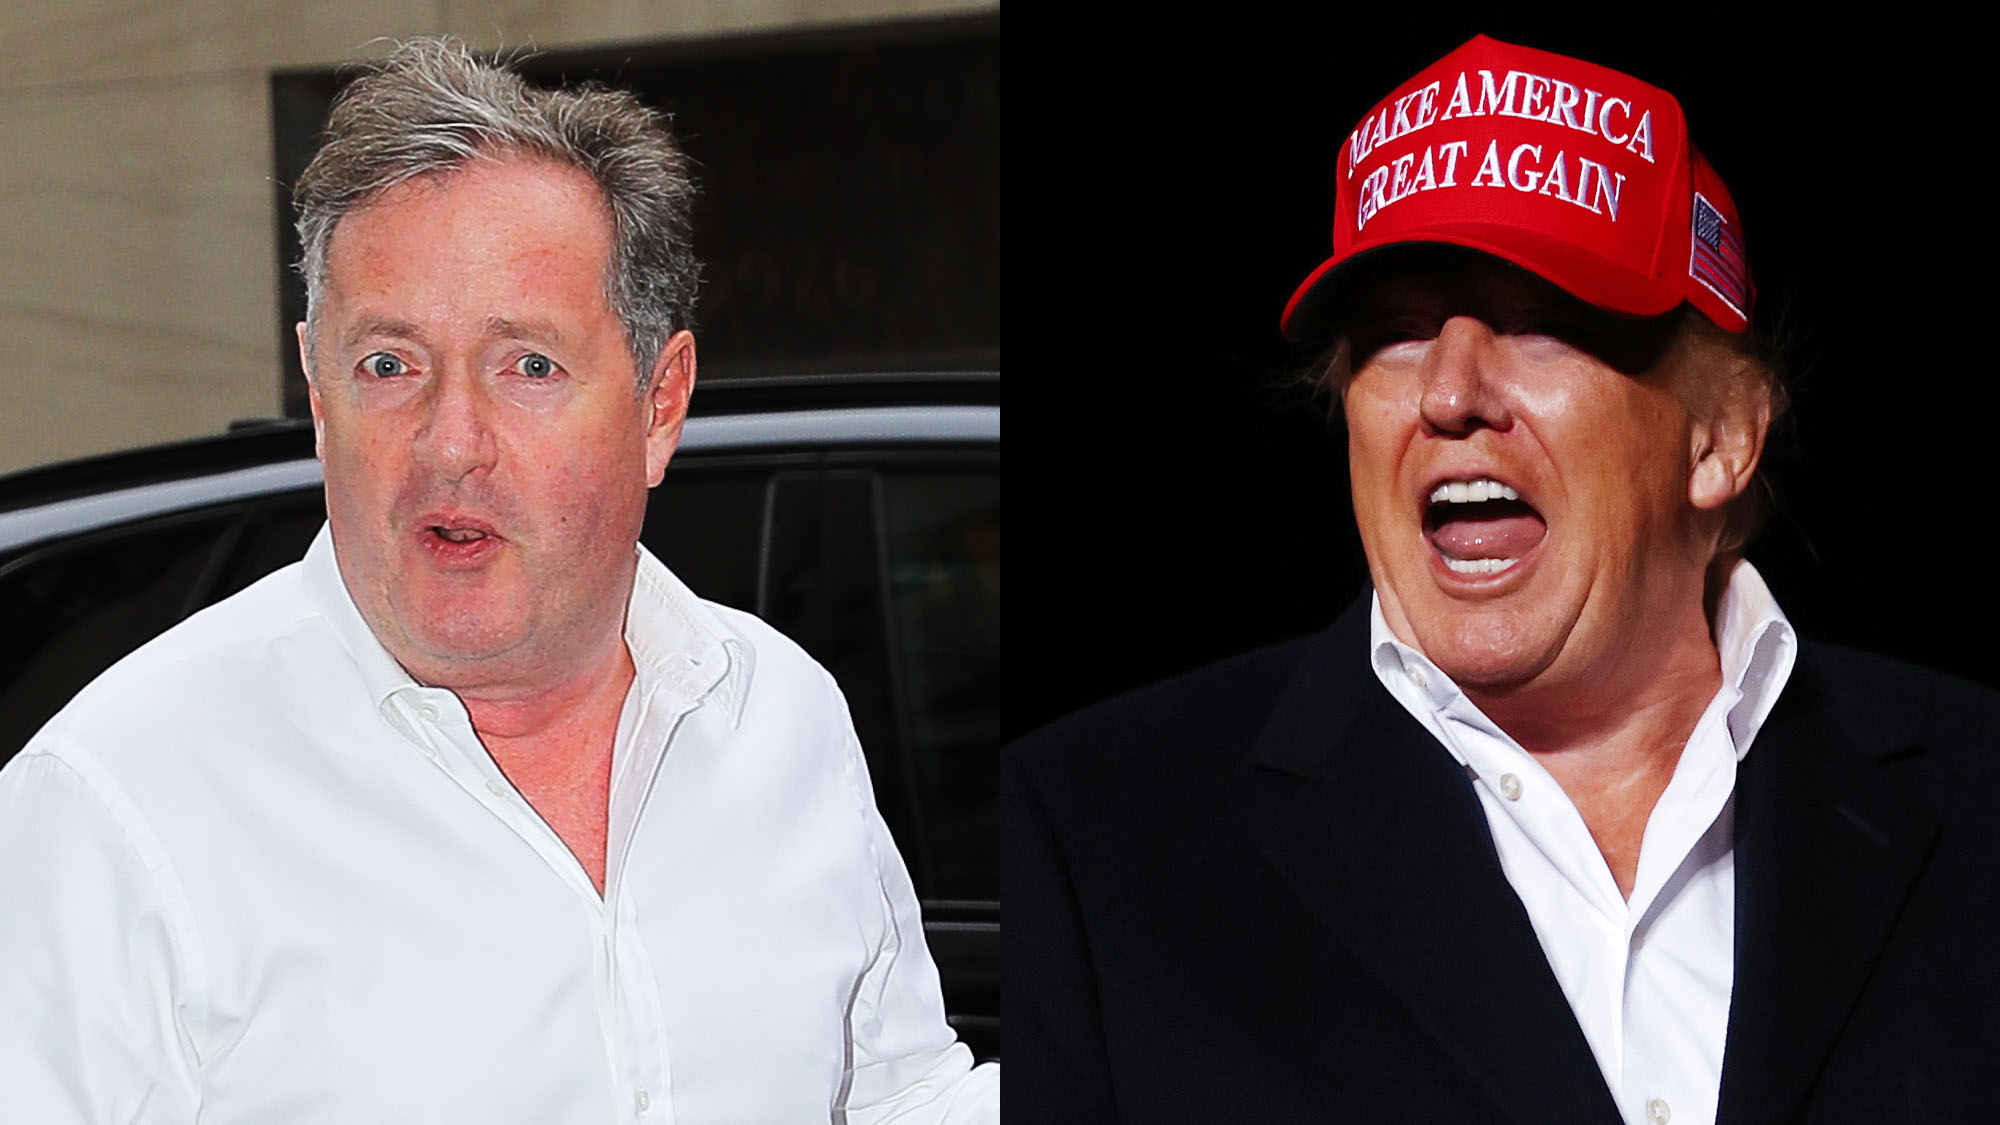 Trump Slams Piers Morgan For Attempting To Unlawfully And Deceptively Edit Their Interview